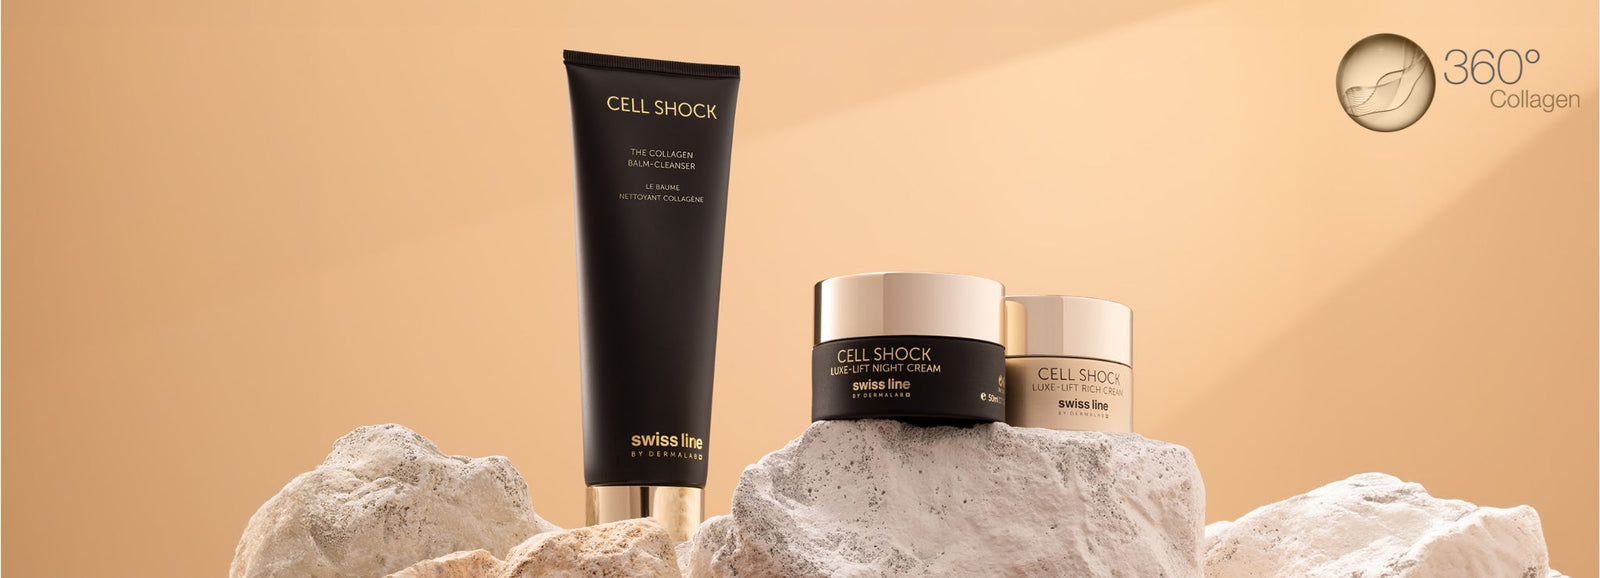 Discover ageless beauty and timeless luxury with Swissline's Cell Shock collection, meticulously crafted over 30 years. Experience luxurious formulas delivering visible and tangible results.